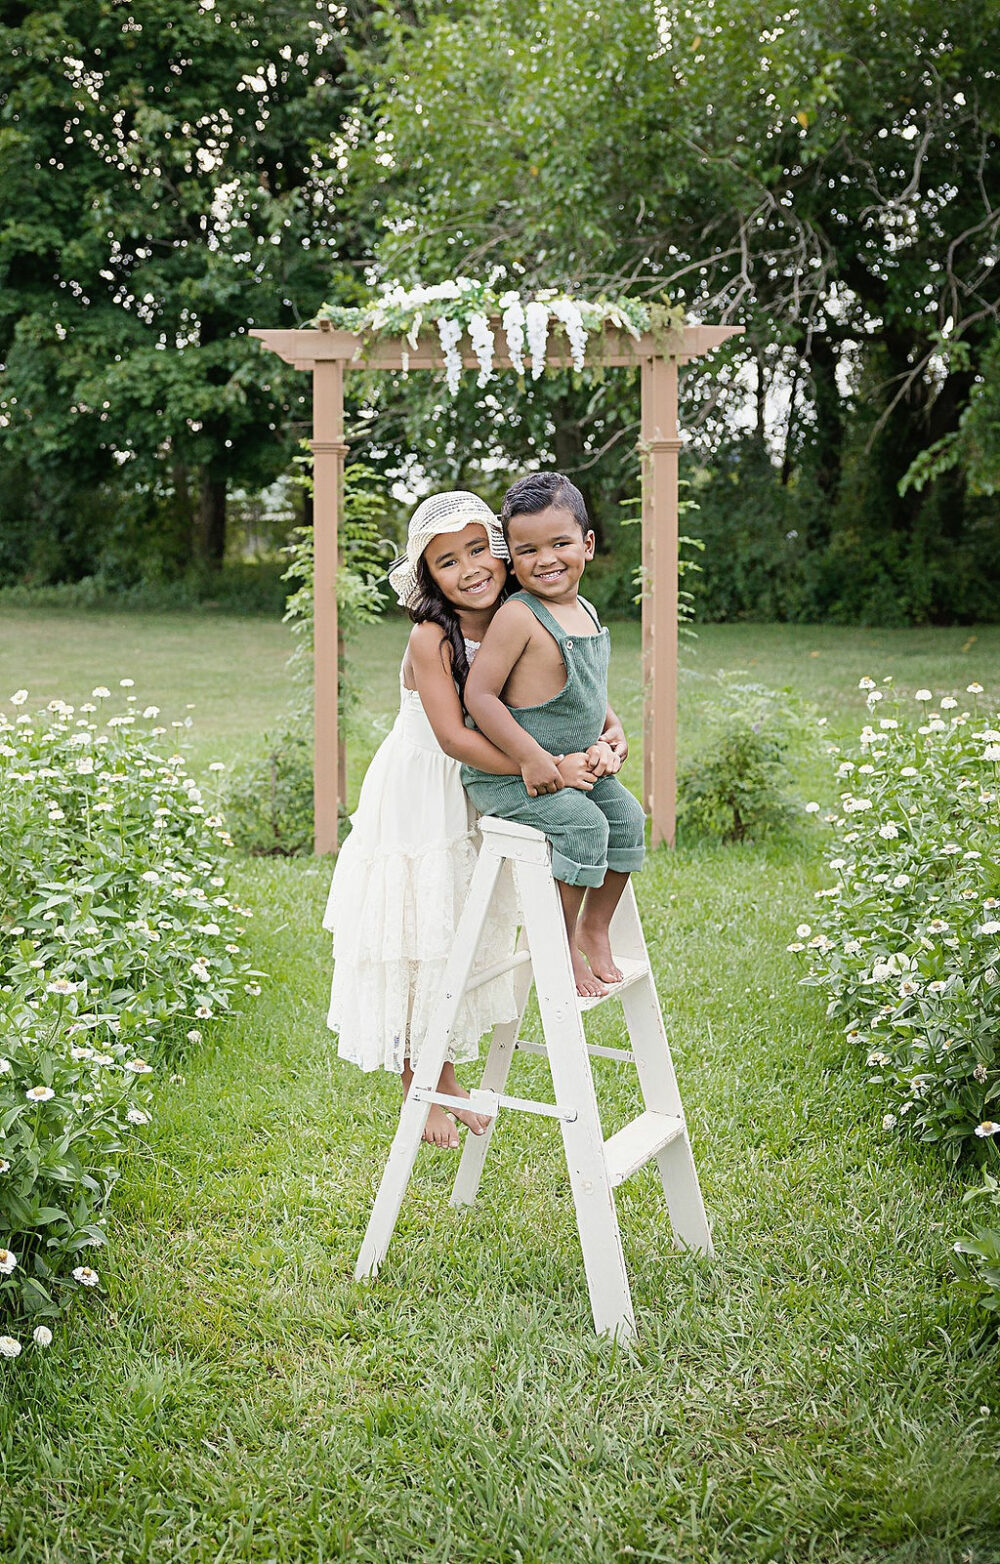 Big sister hugging younger brother while on a ladder for flower mini sessions and flower garden taken in Mount Laurel, NJ.